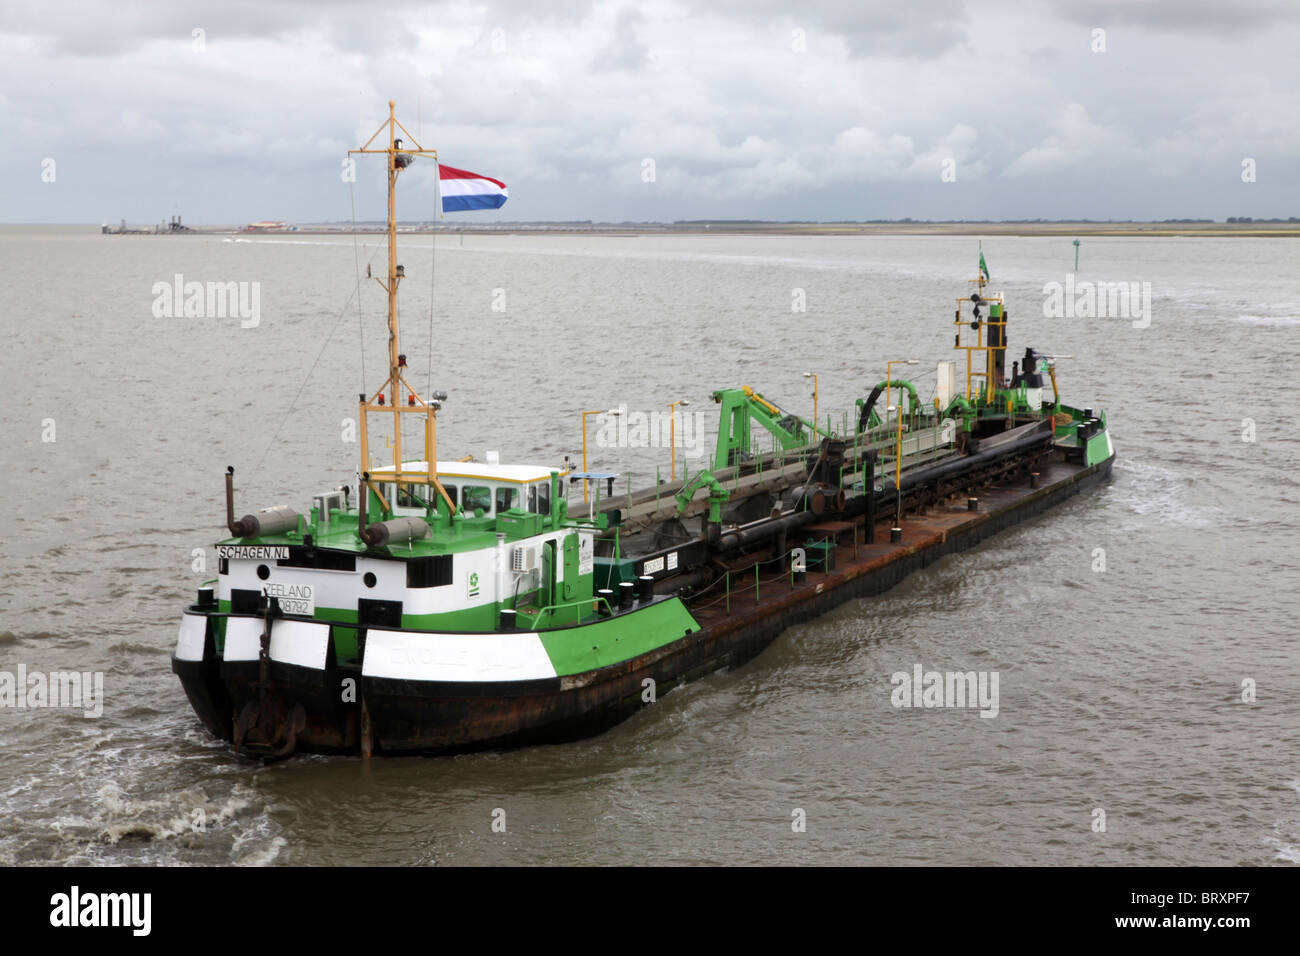 dredging barge in the netherlands Stock Photo